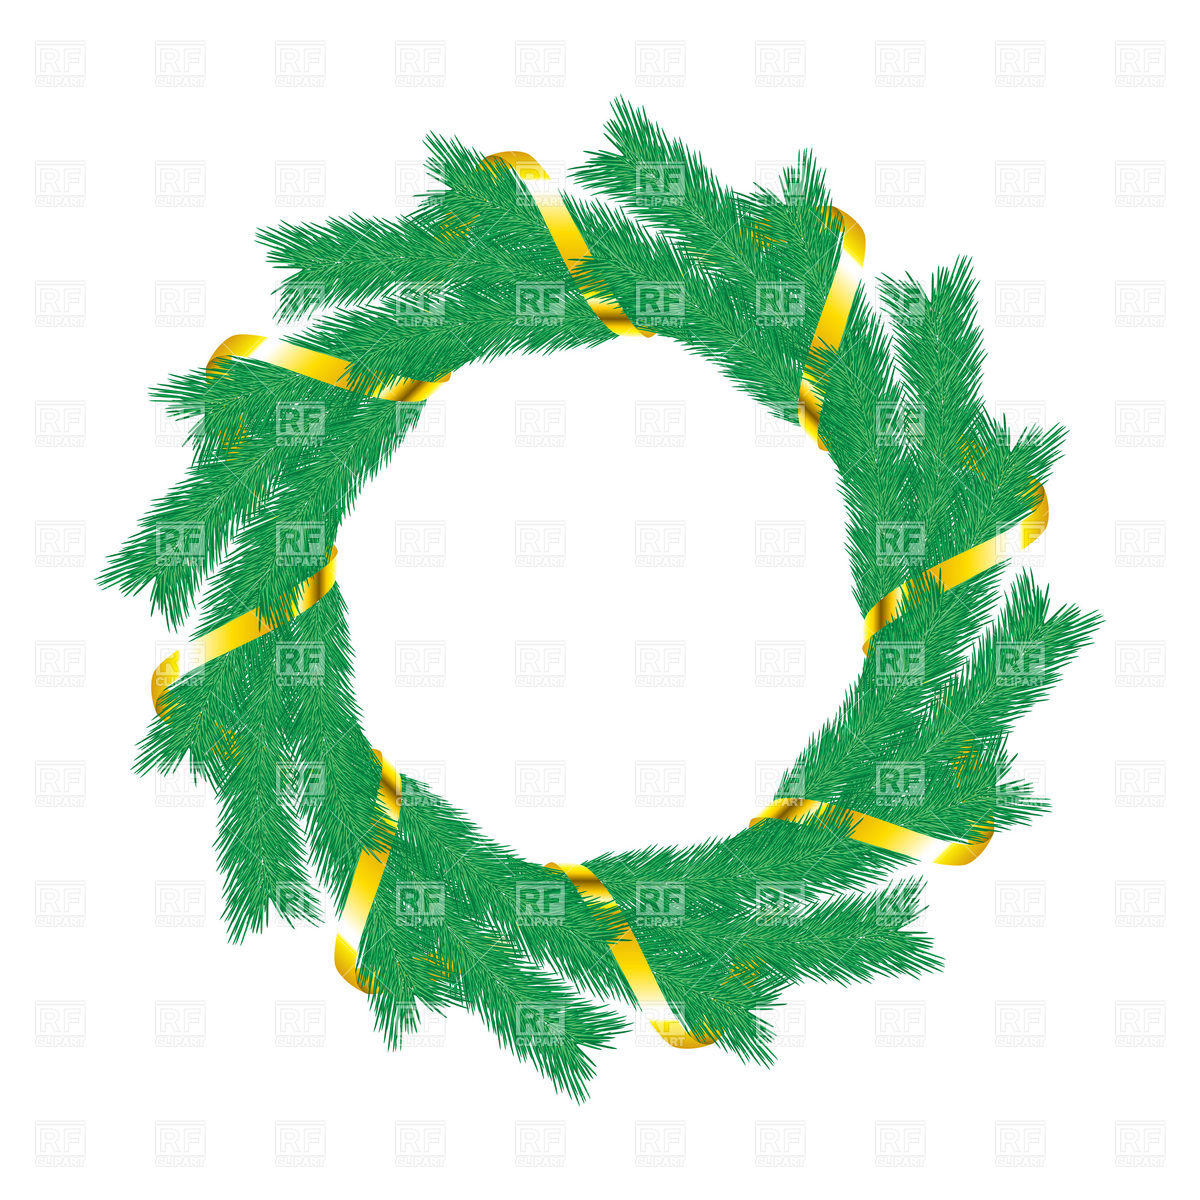 Round Christmas Wreath With Ribbon 7769 Download Royalty Free Vector